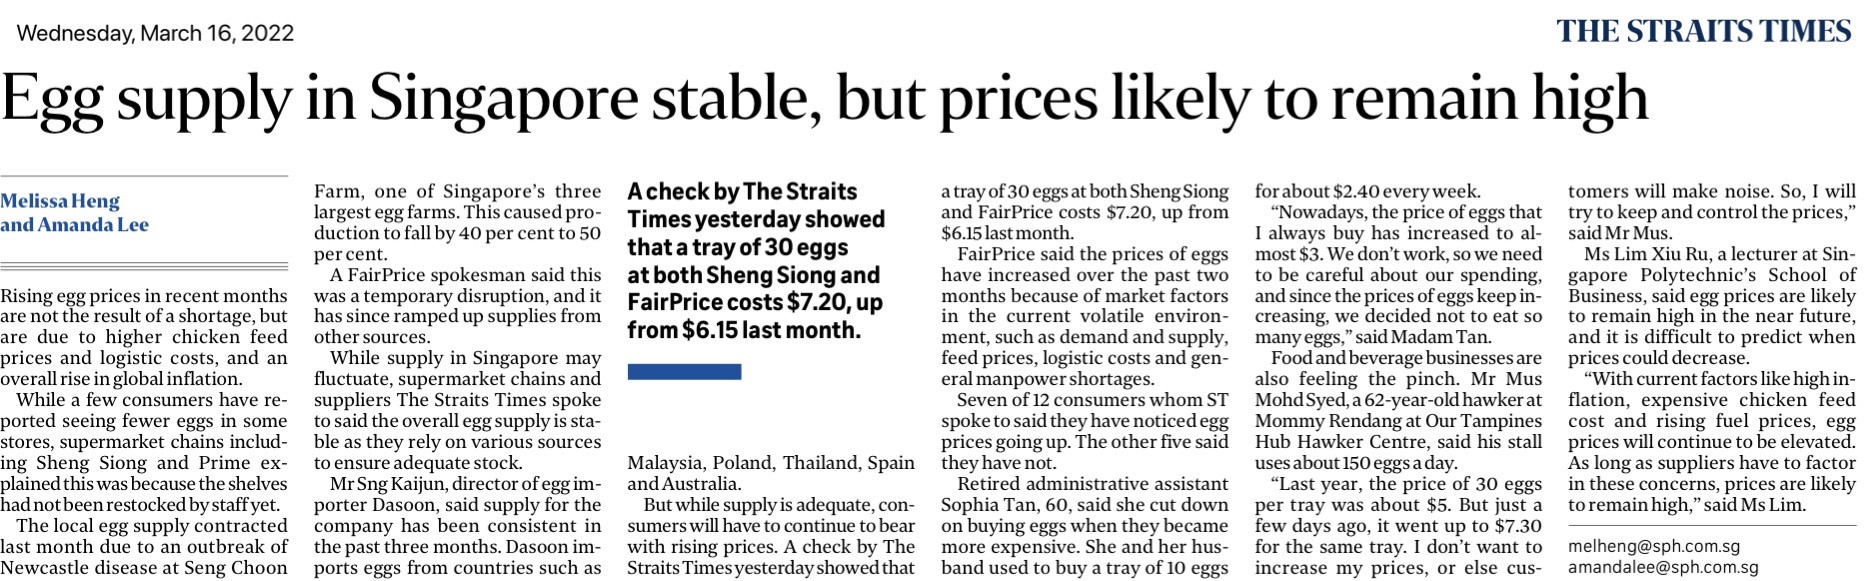 Egg supply in Singapore stable, but prices likely to remain high - ST, 16 March 2022